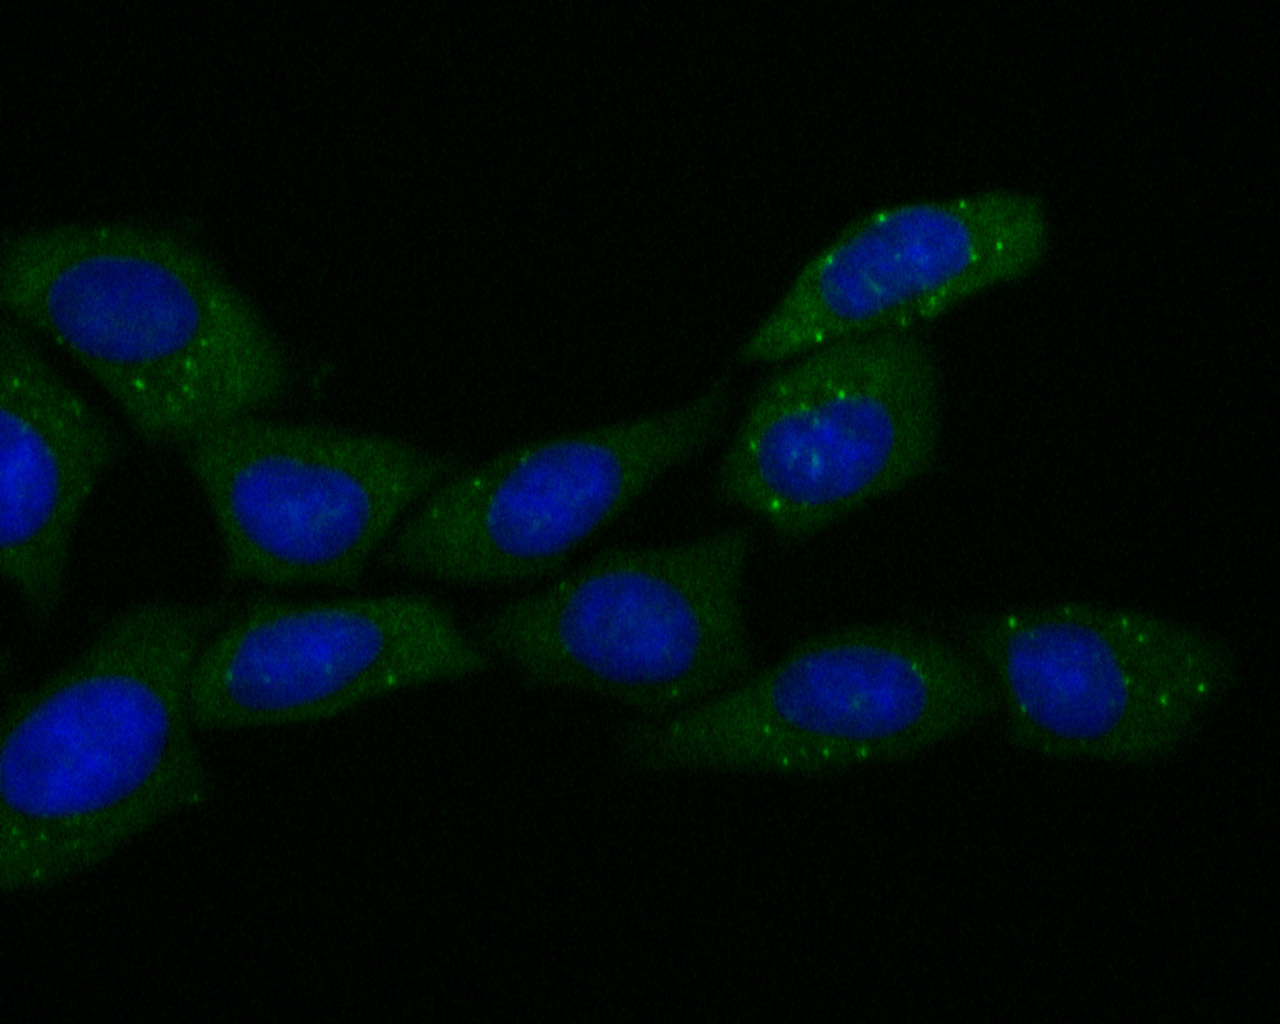 ICC staining of ECM1 in SiHa cells (green). Formalin fixed cells were permeabilized with 0.1% Triton X-100 in TBS for 10 minutes at room temperature and blocked with 1% Blocker BSA for 15 minutes at room temperature. Cells were probed with the primary antibody (ET7110-41, 1/50) for 1 hour at room temperature, washed with PBS. Alexa Fluor®488 Goat anti-Rabbit IgG was used as the secondary antibody at 1/1,000 dilution. The nuclear counter stain is DAPI (blue).